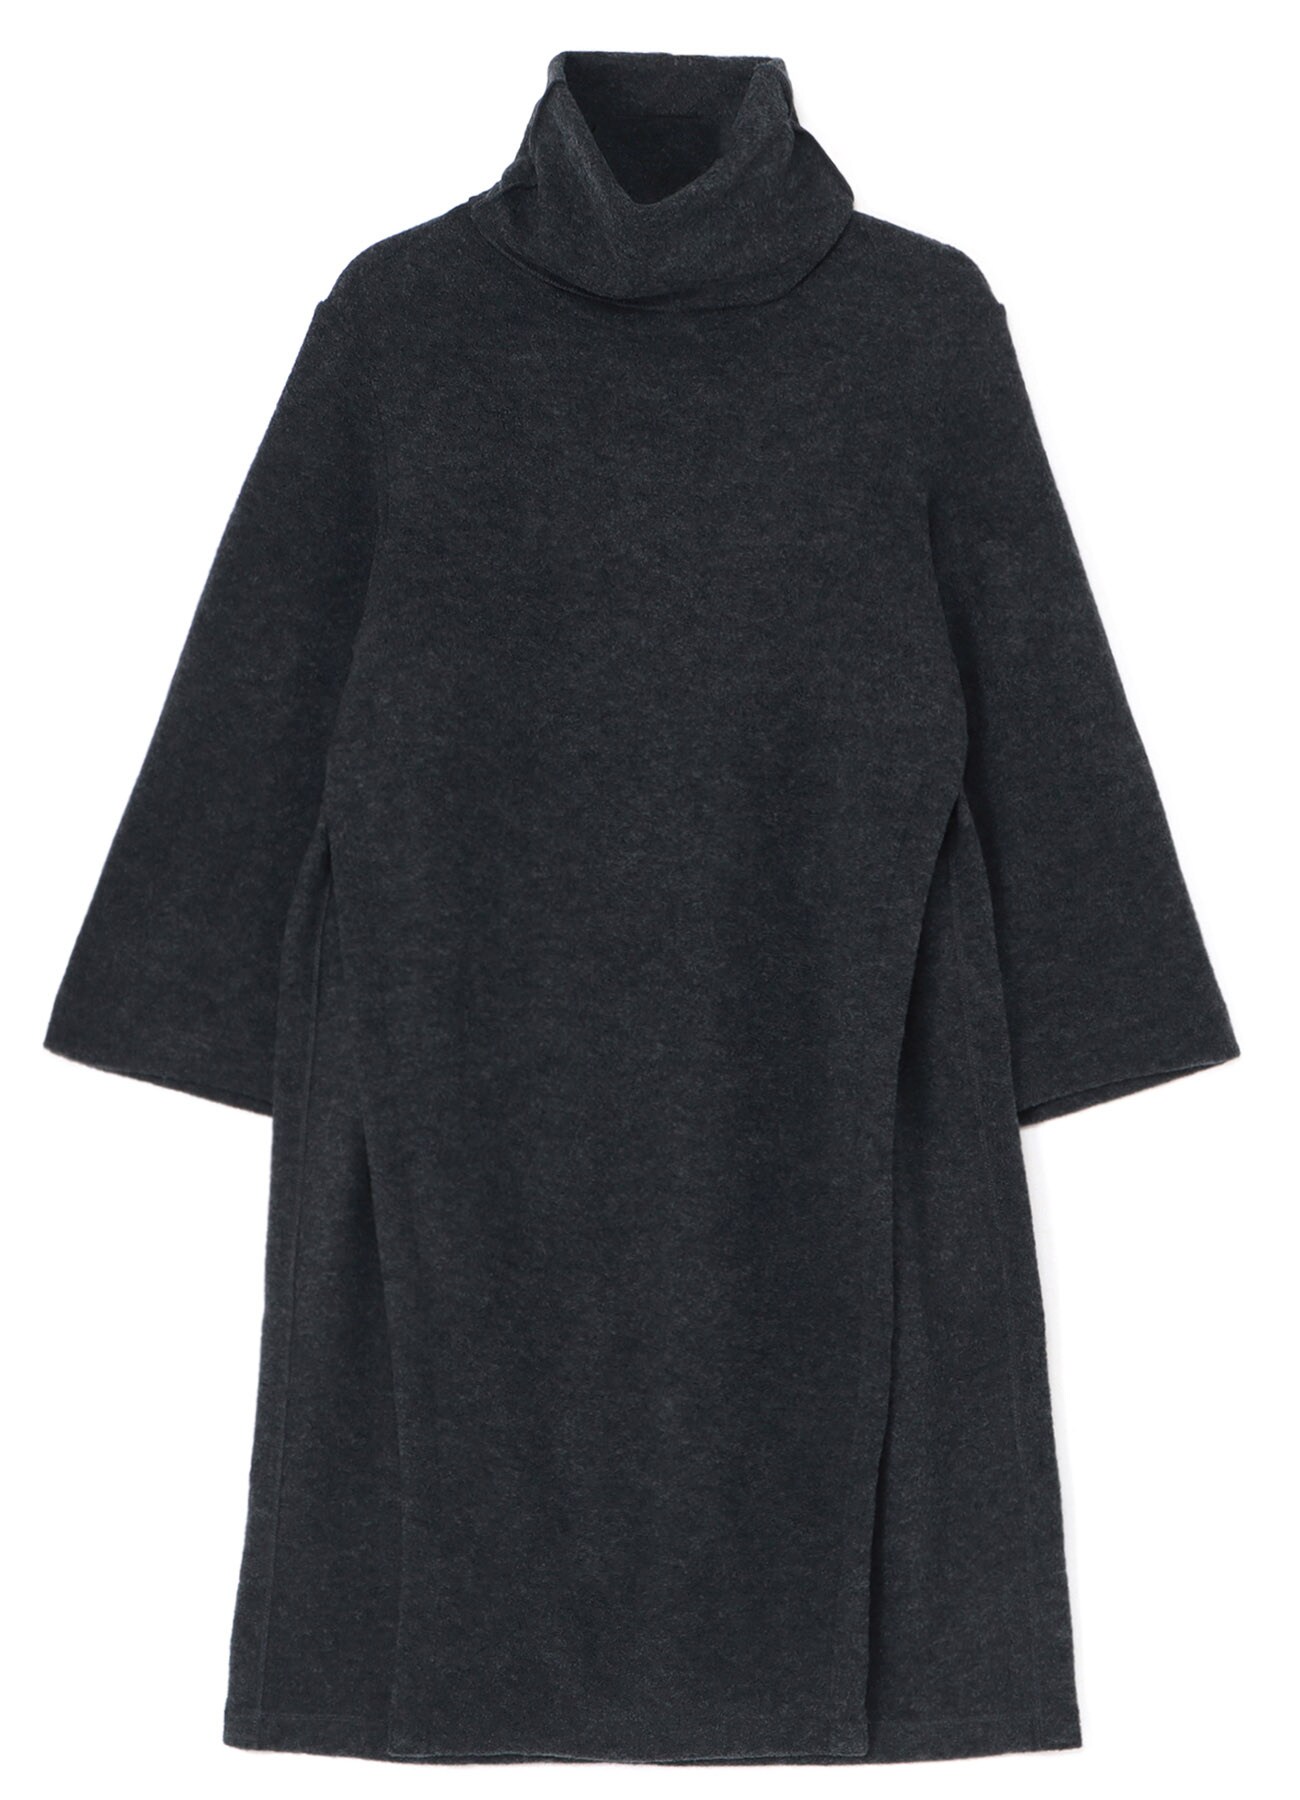 SOFT WOOL PILE PULLOVER DRESS WITH TURTLENECK